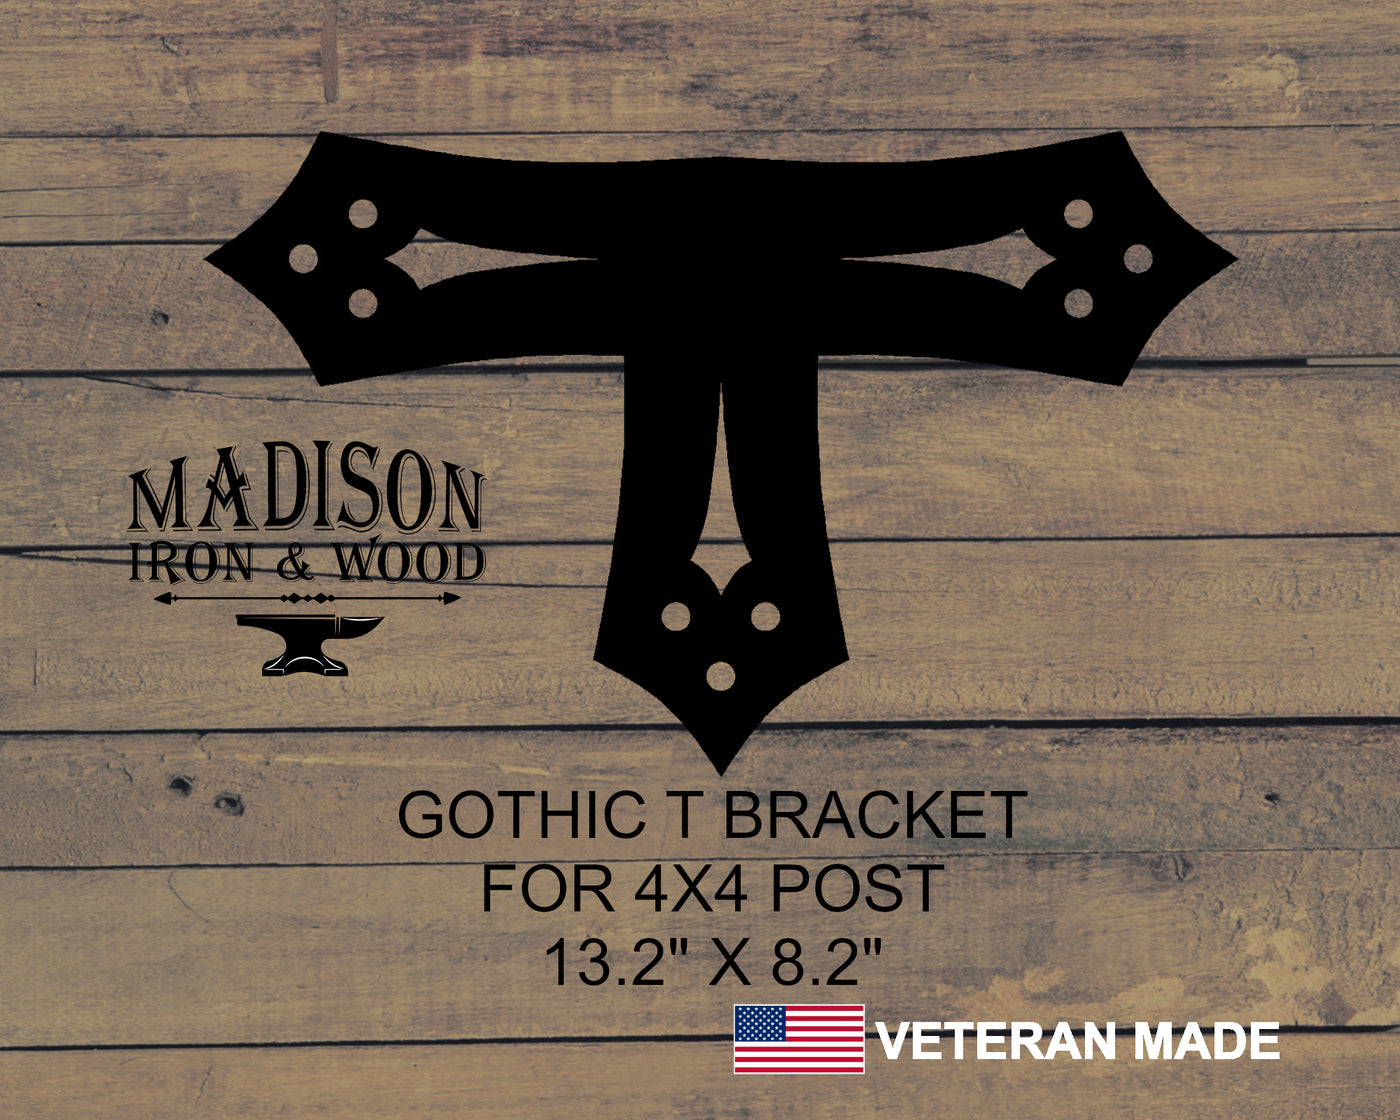 Gothic Brackets For 4x4 Dimensional Lumber - Madison Iron and Wood - Brackets - metal outdoor decor - Steel deocrations - american made products - veteran owned business products - fencing decorations - fencing supplies - custom wall decorations - personalized wall signs - steel - decorative post caps - steel post caps - metal post caps - brackets - structural brackets - home improvement - easter - easter decorations - easter gift - easter yard decor